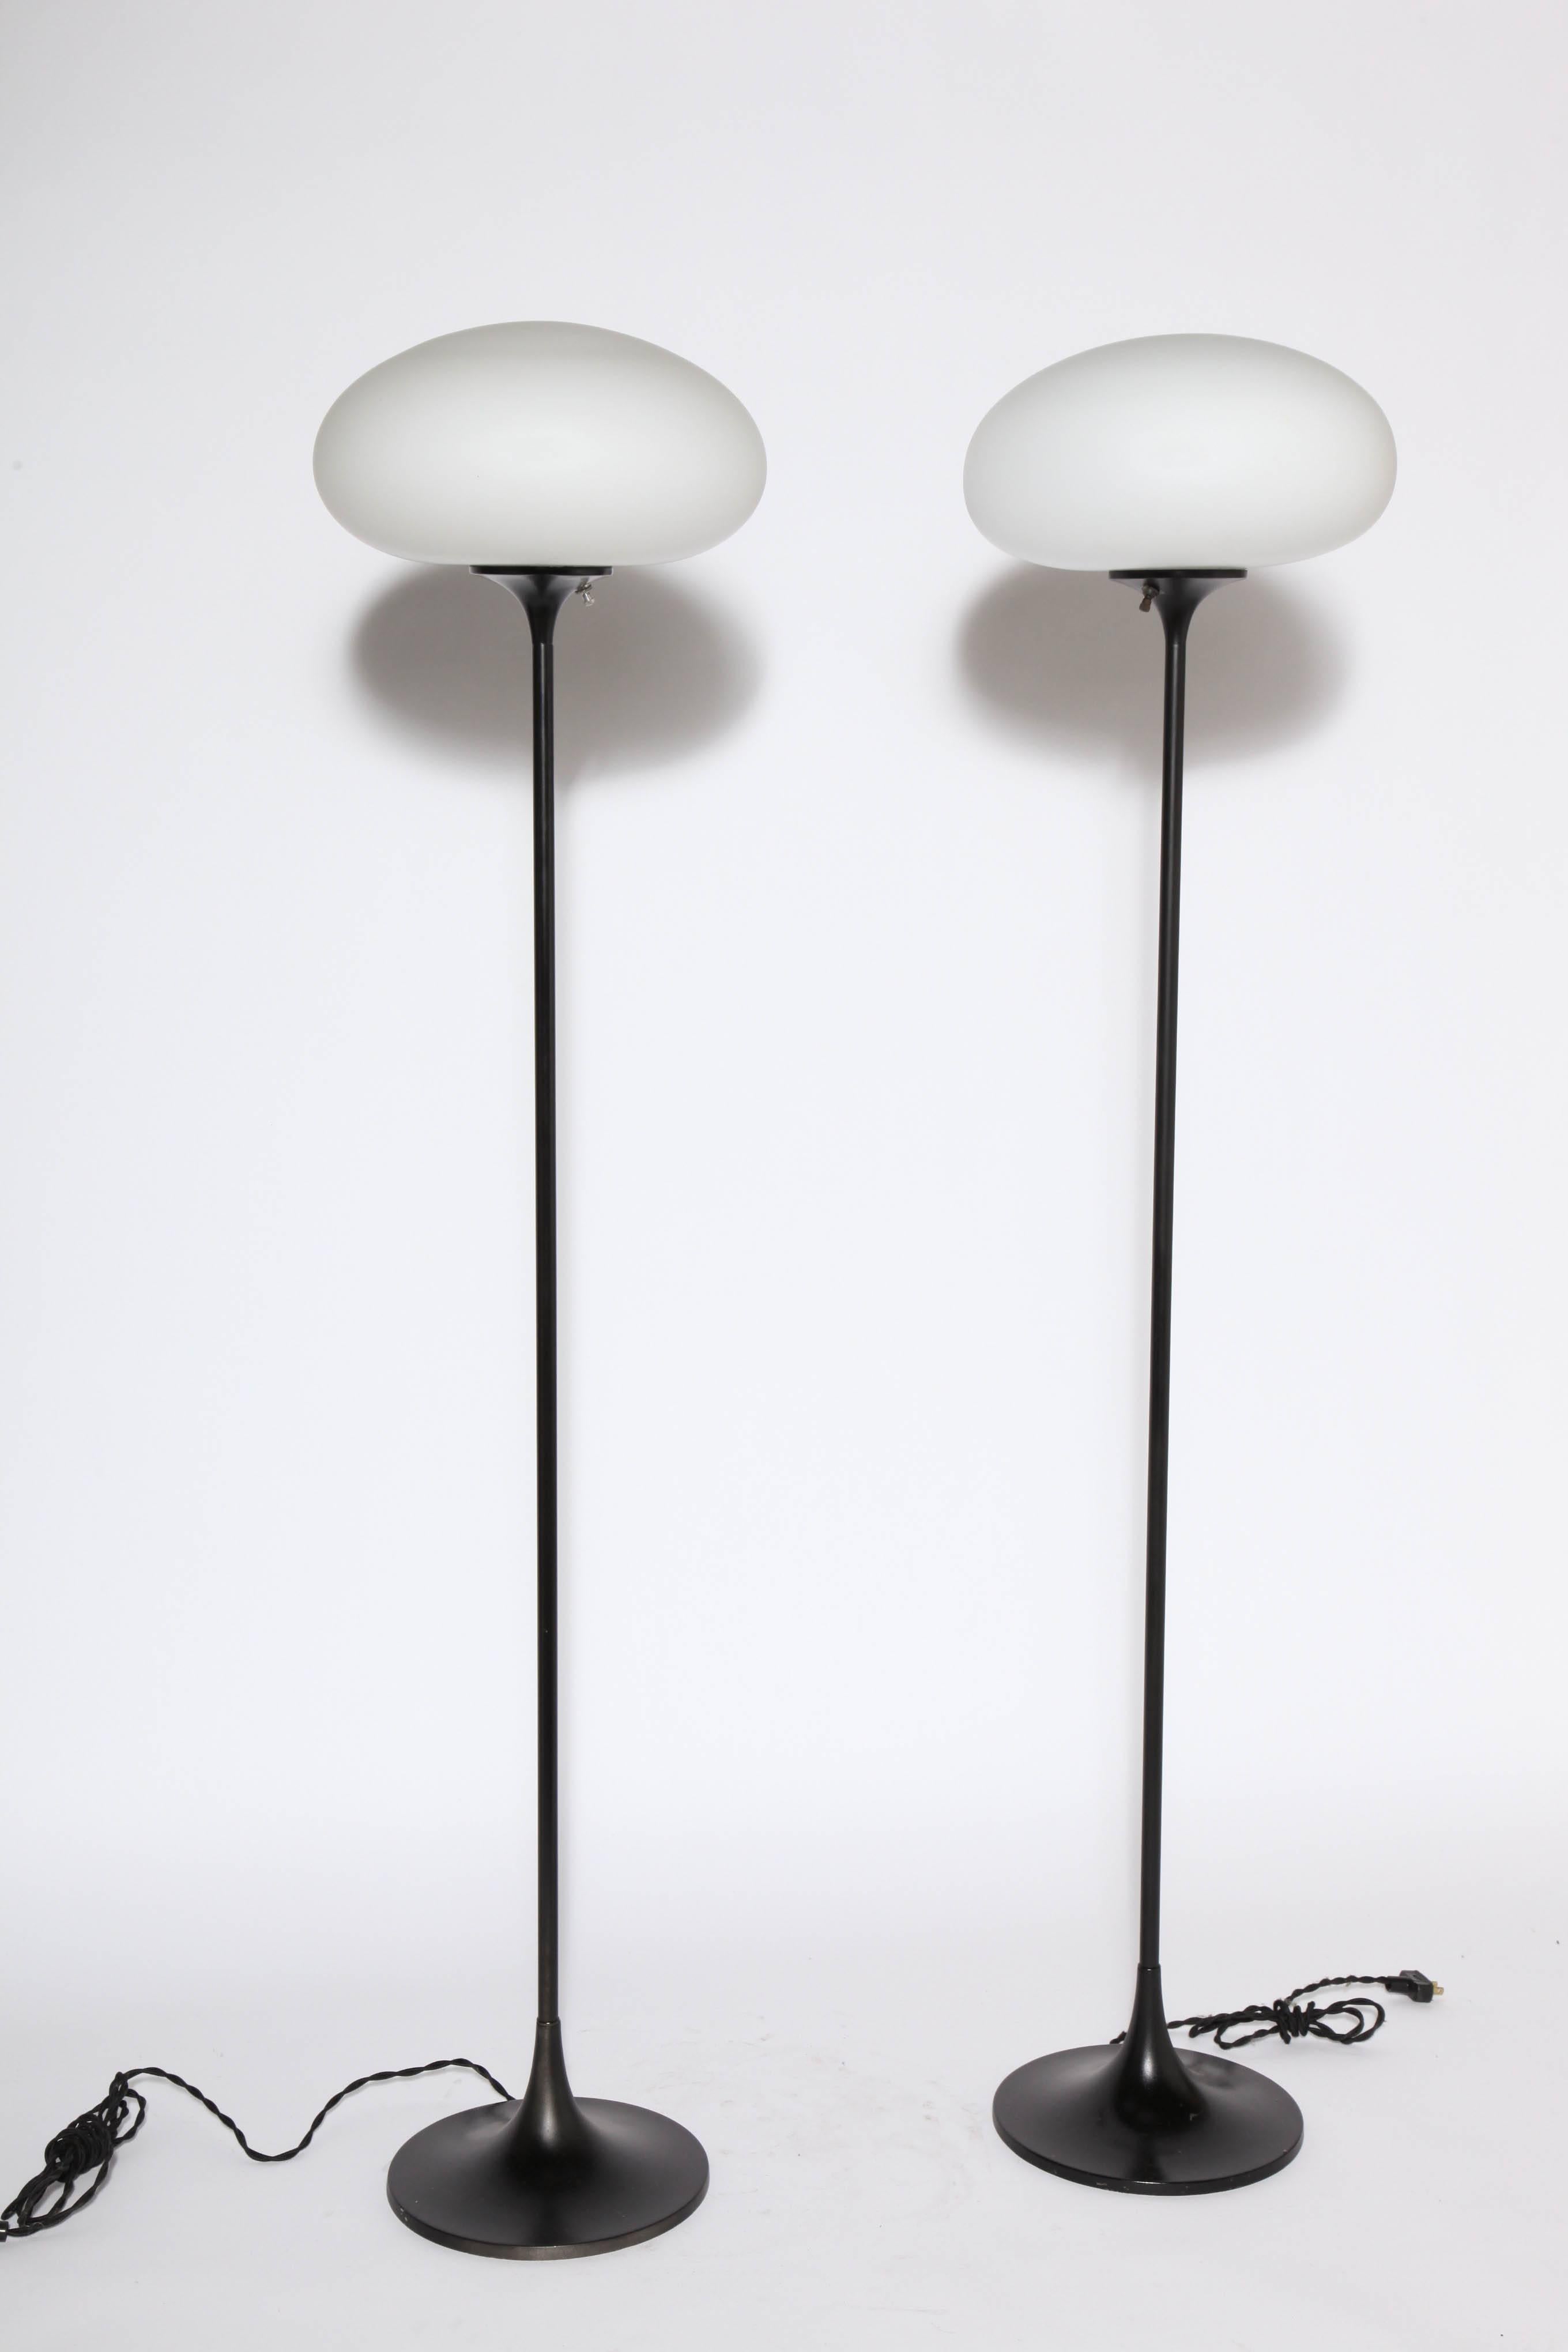 Pair of Bill Curry Mushroom Series Floor Lamps by Design Line Segundo, California, circa 1960. Featuring Black enameled metal tubular stems, round 10D tulip bases and White Frosted Glass Globes. Balanced. Sculptural. California Modern. Rarity.